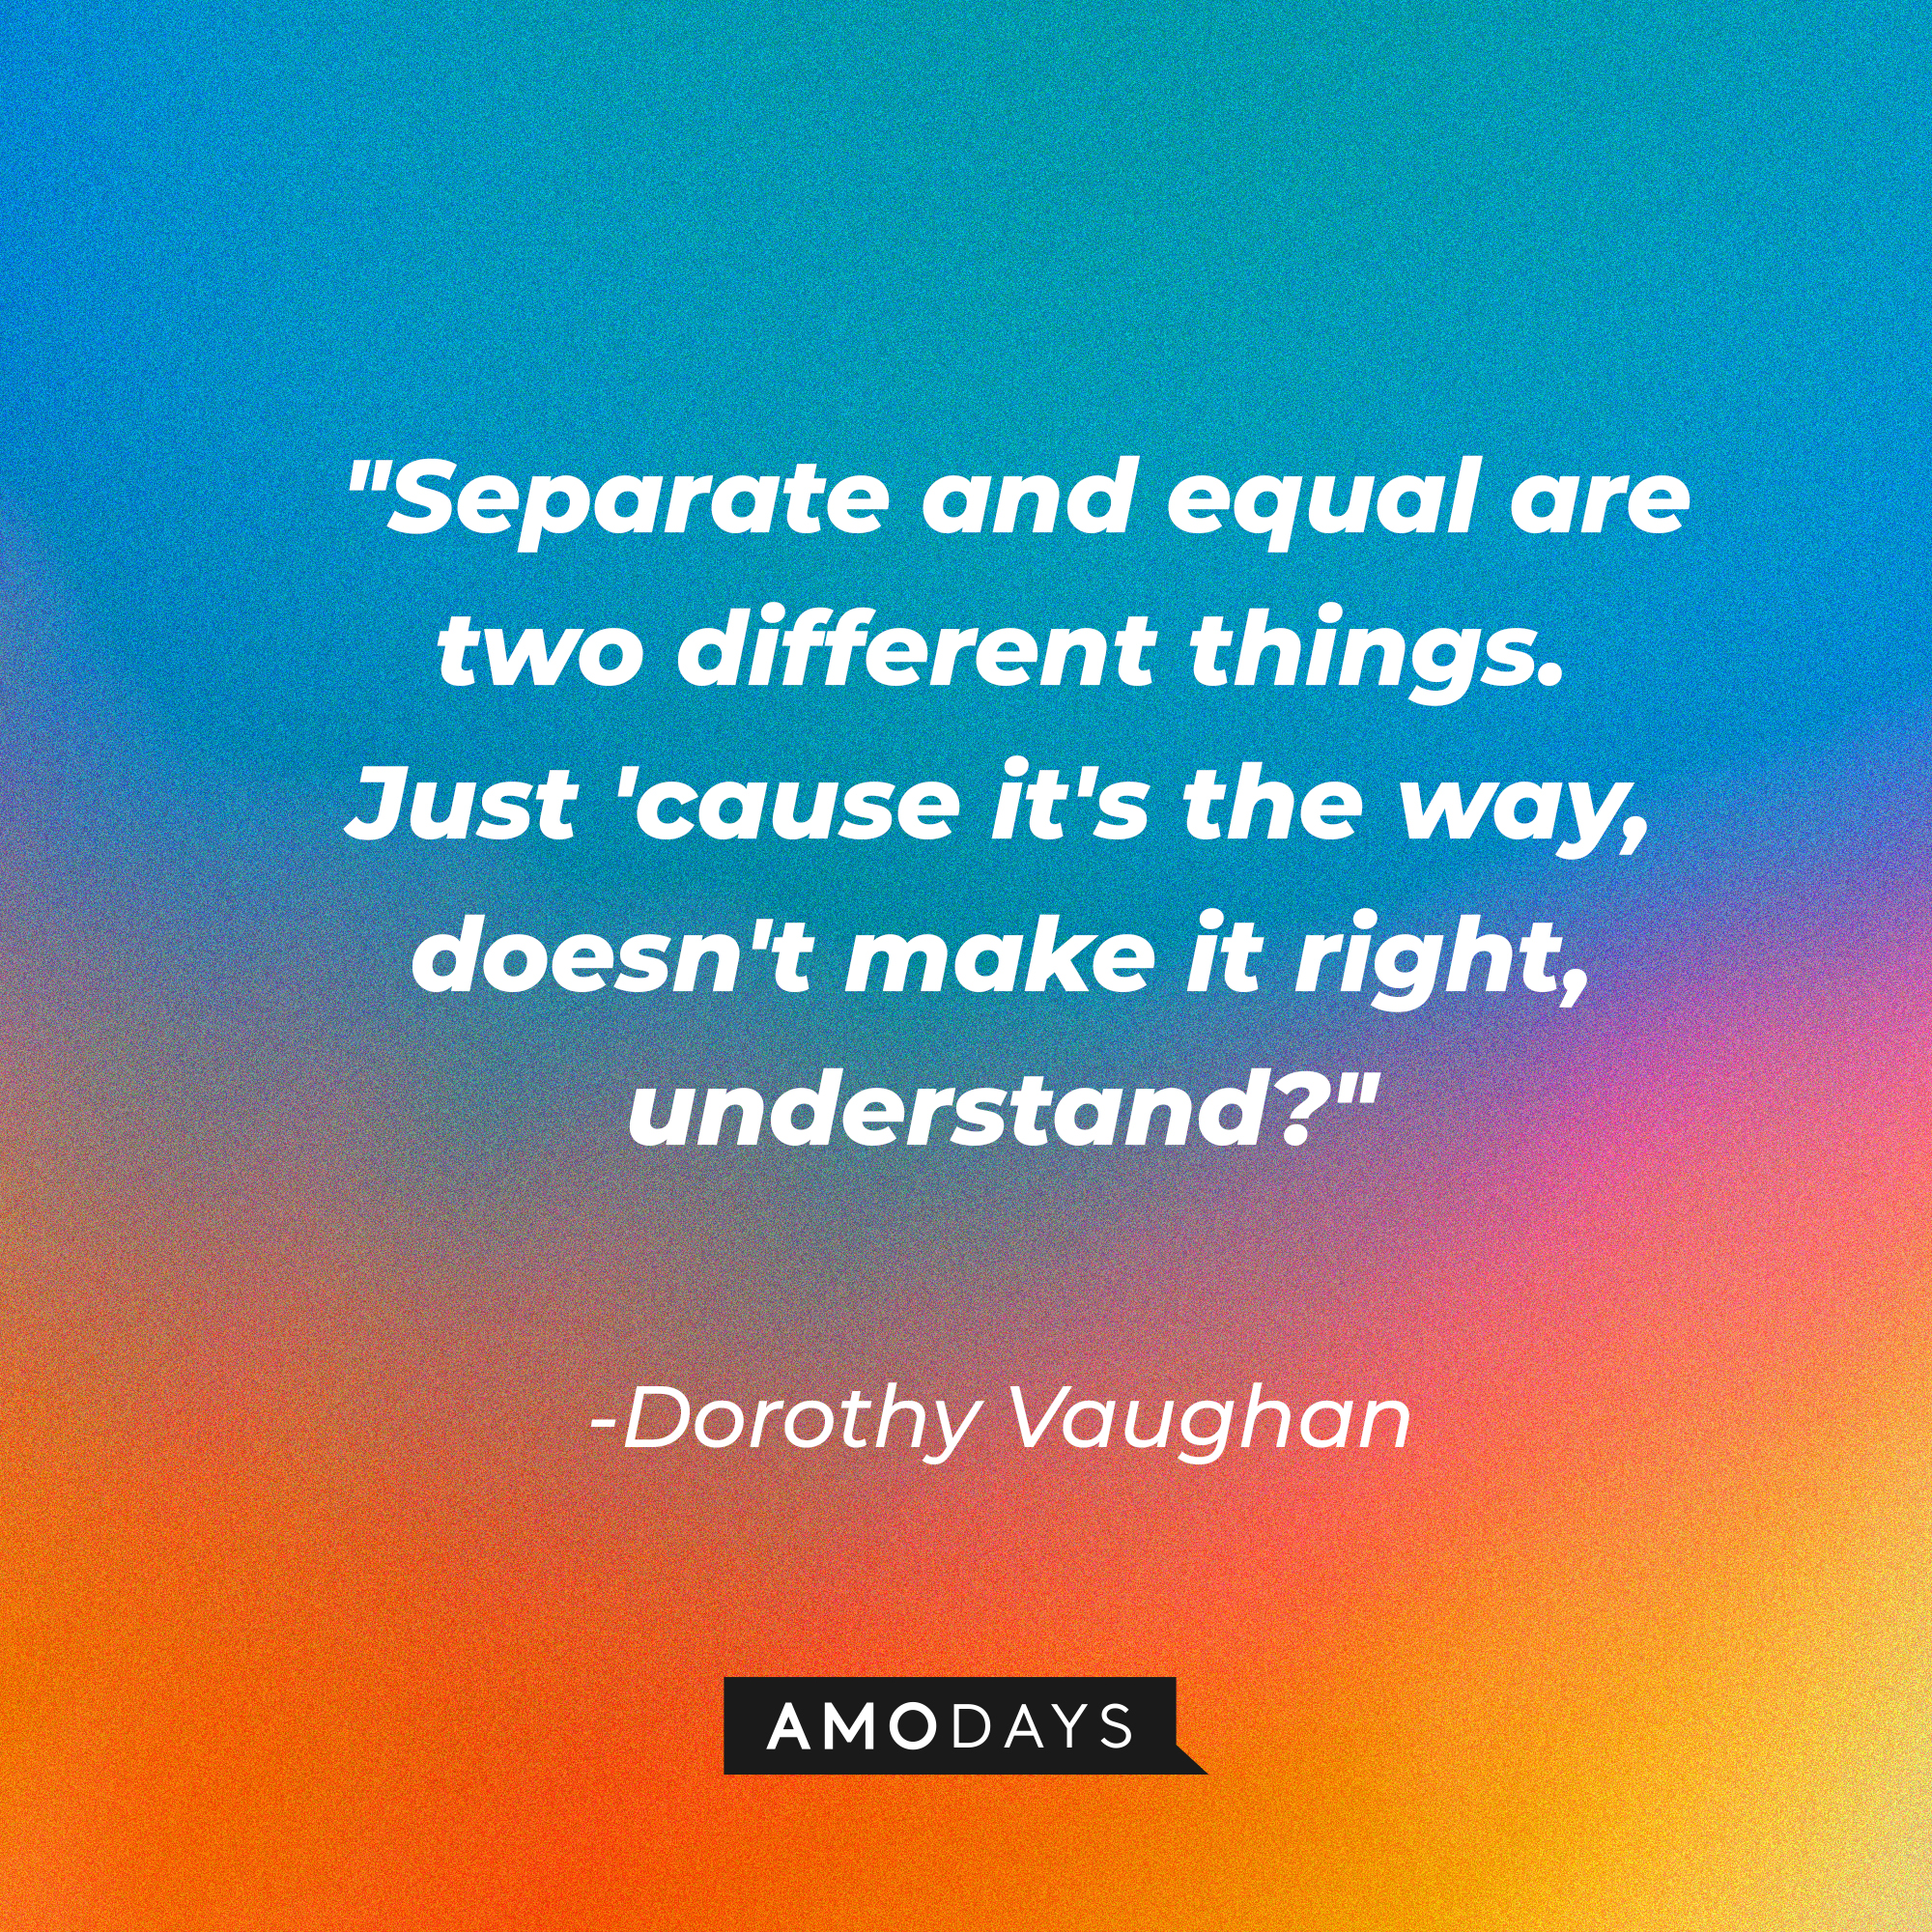 Dorothy Vaughan's quote: “Separate and equal are two different things. Just 'cause it's the way, doesn't make it right, understand?” | Source: Amodays